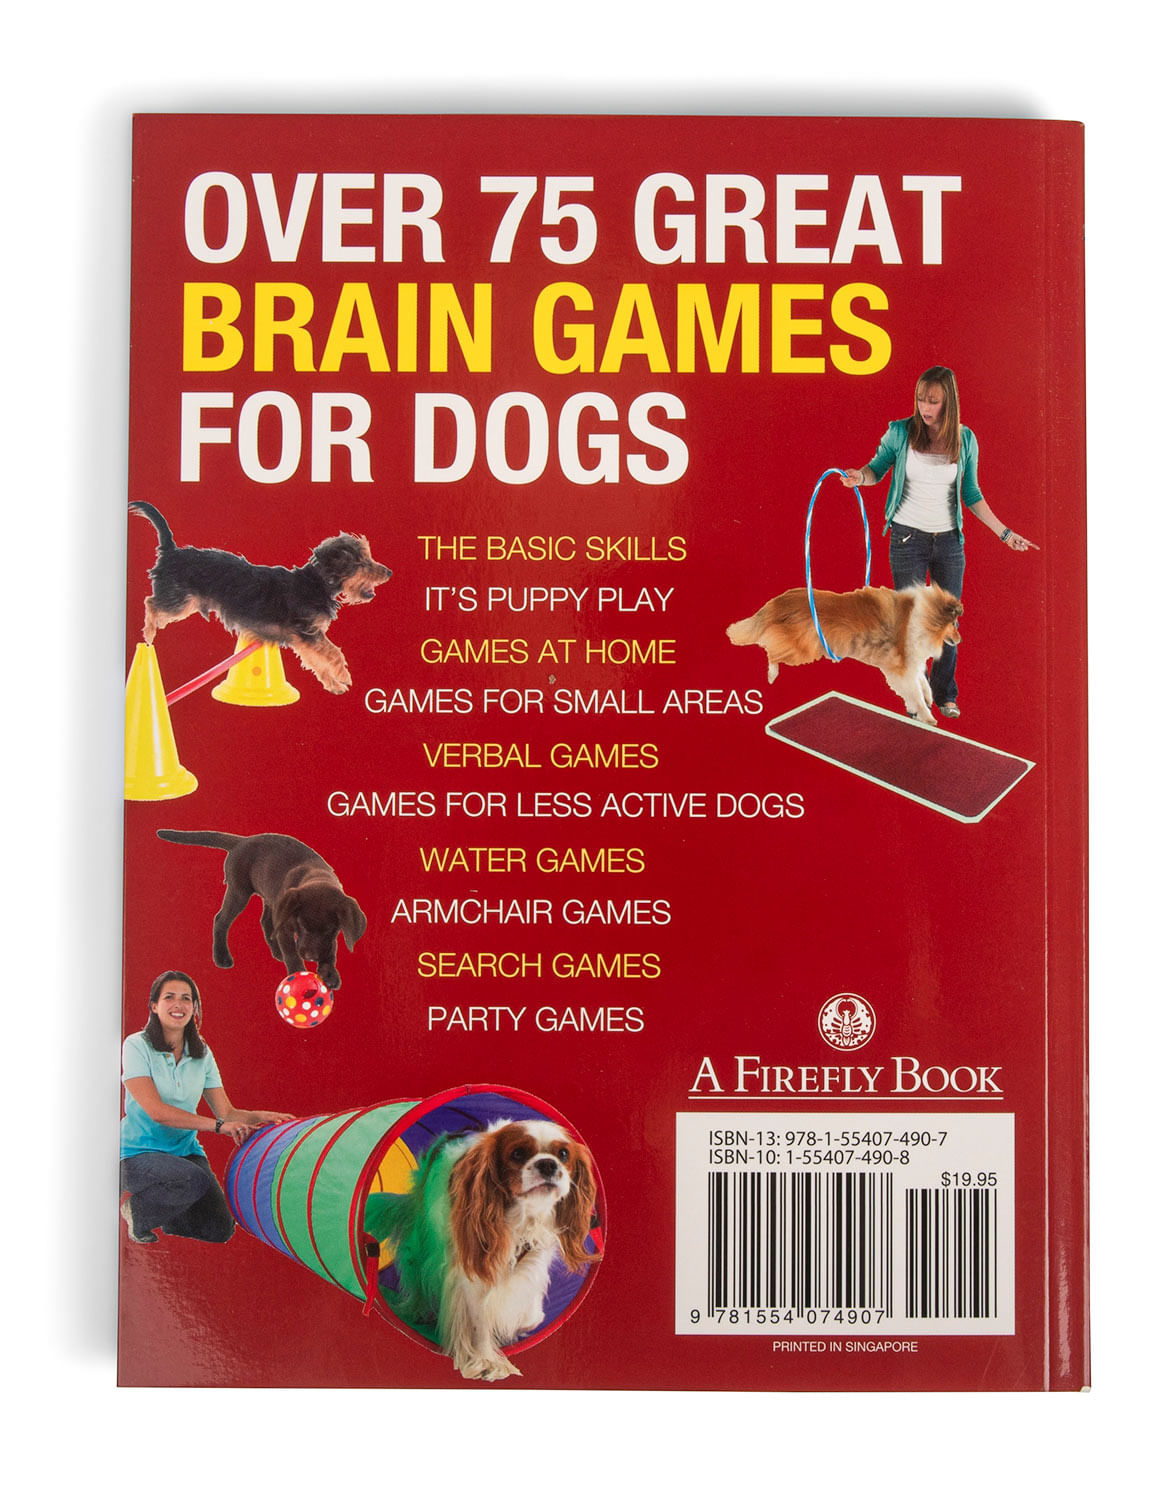 6 Brain Games for Dogs - Fire Hydrant Pet Sitting Co., LLC